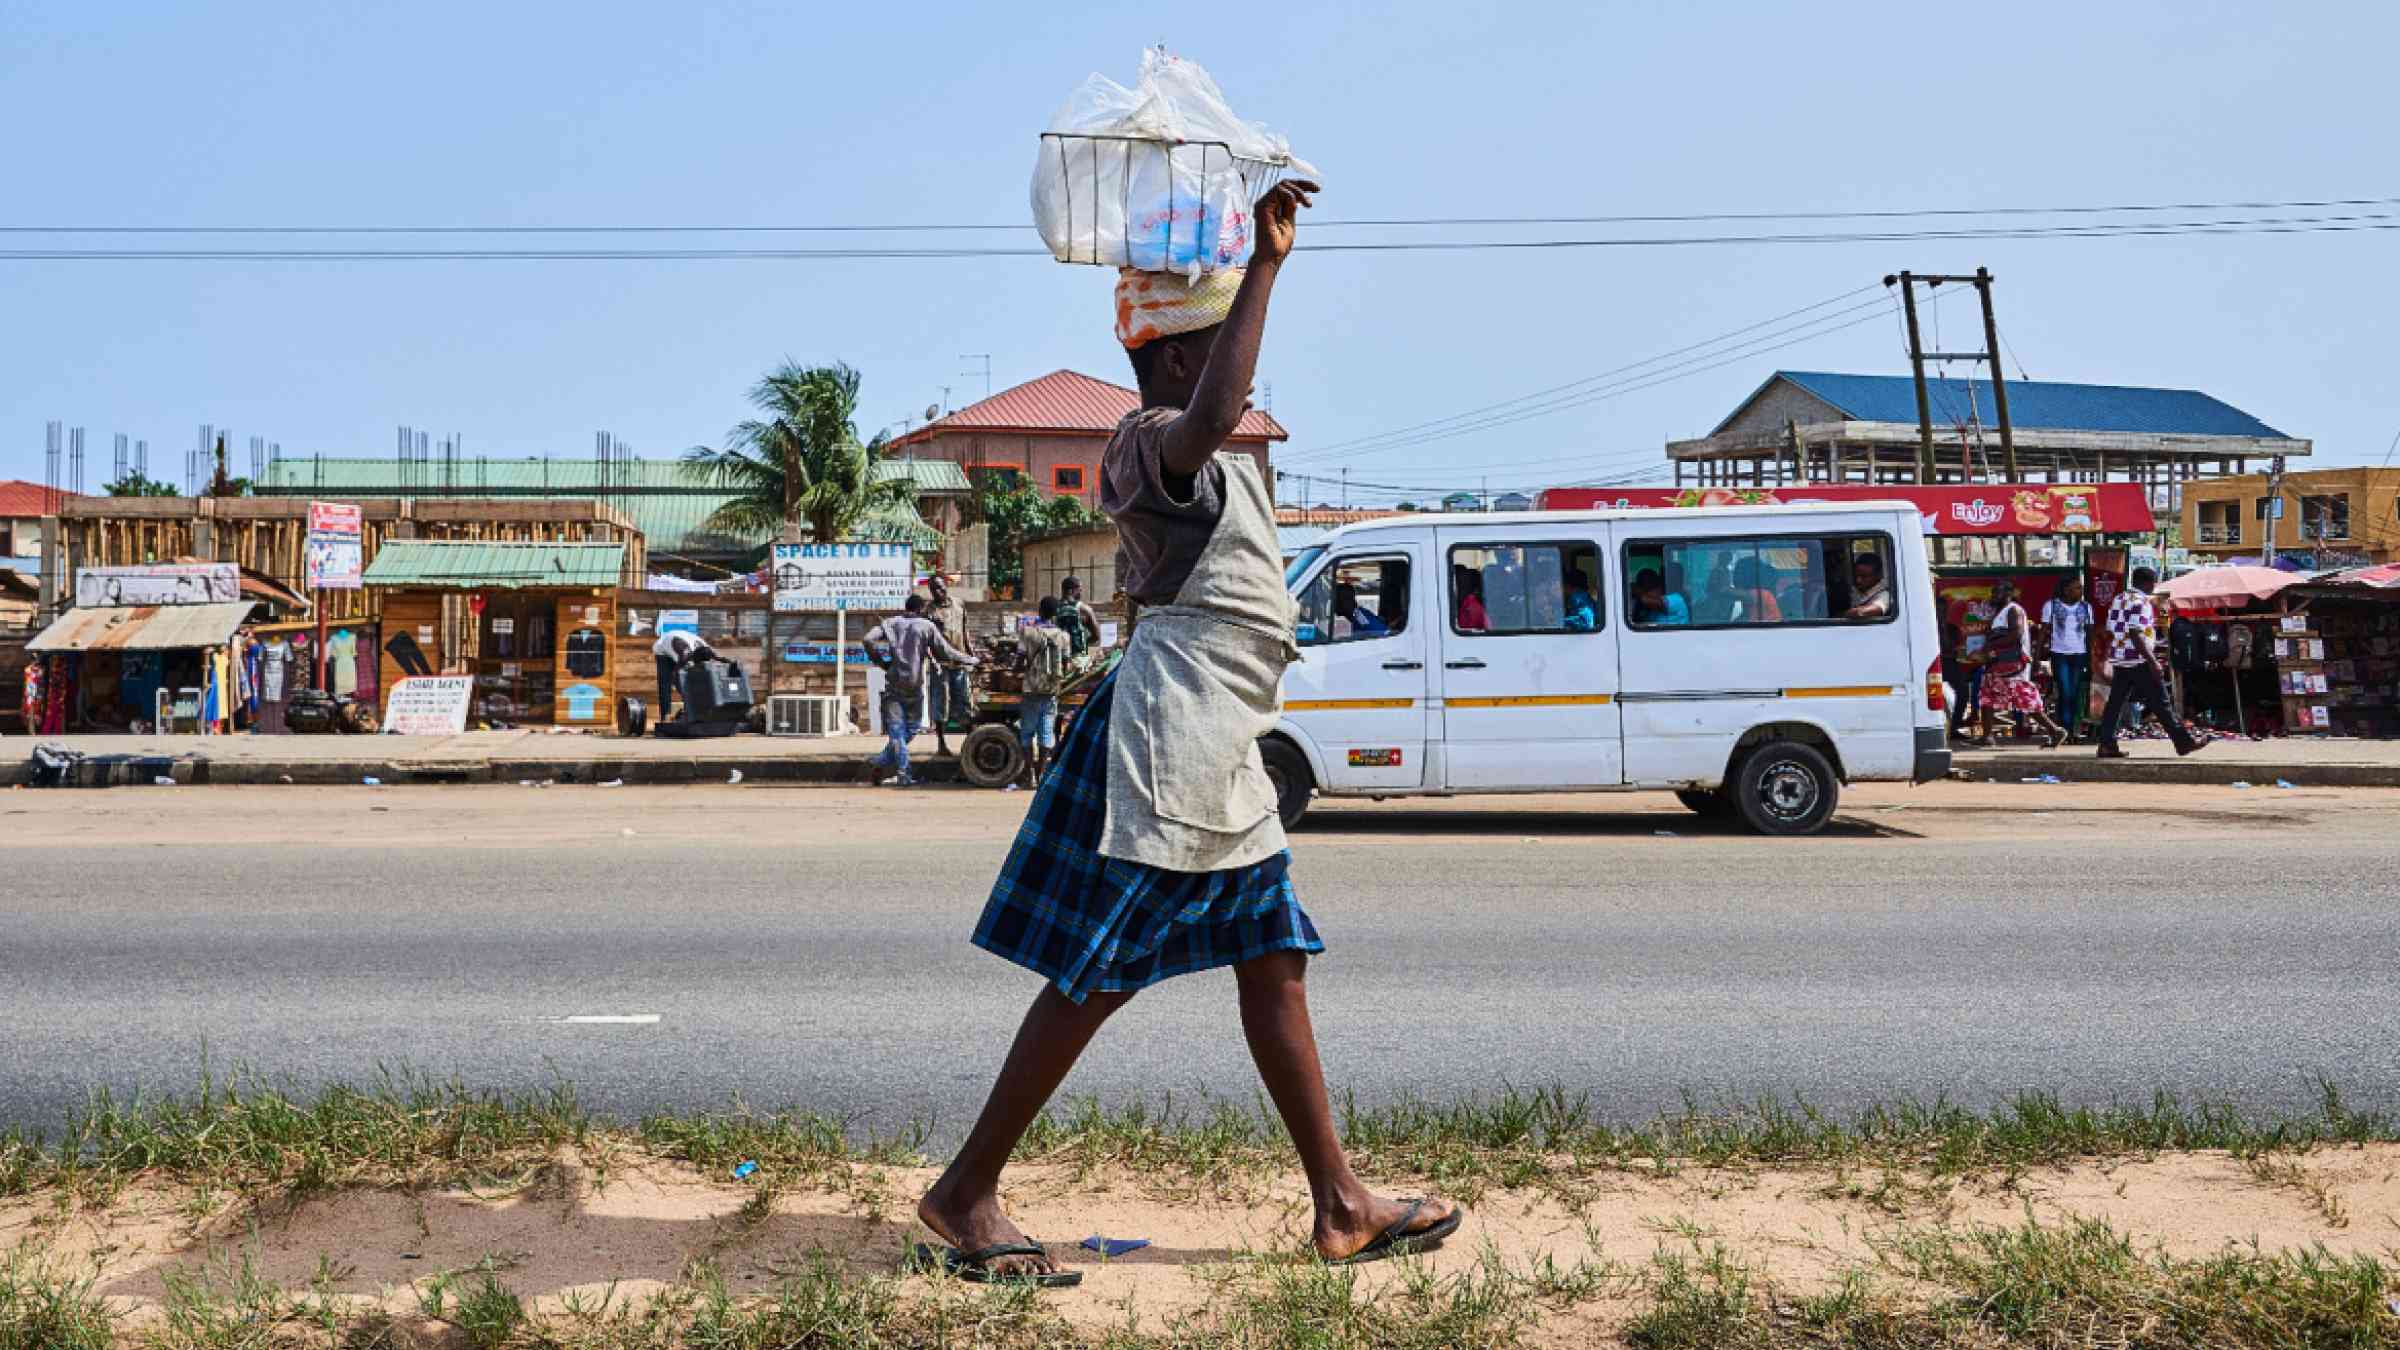 A woman who sells water on the street in Accra, Ghana, carries her load balanced on her head.